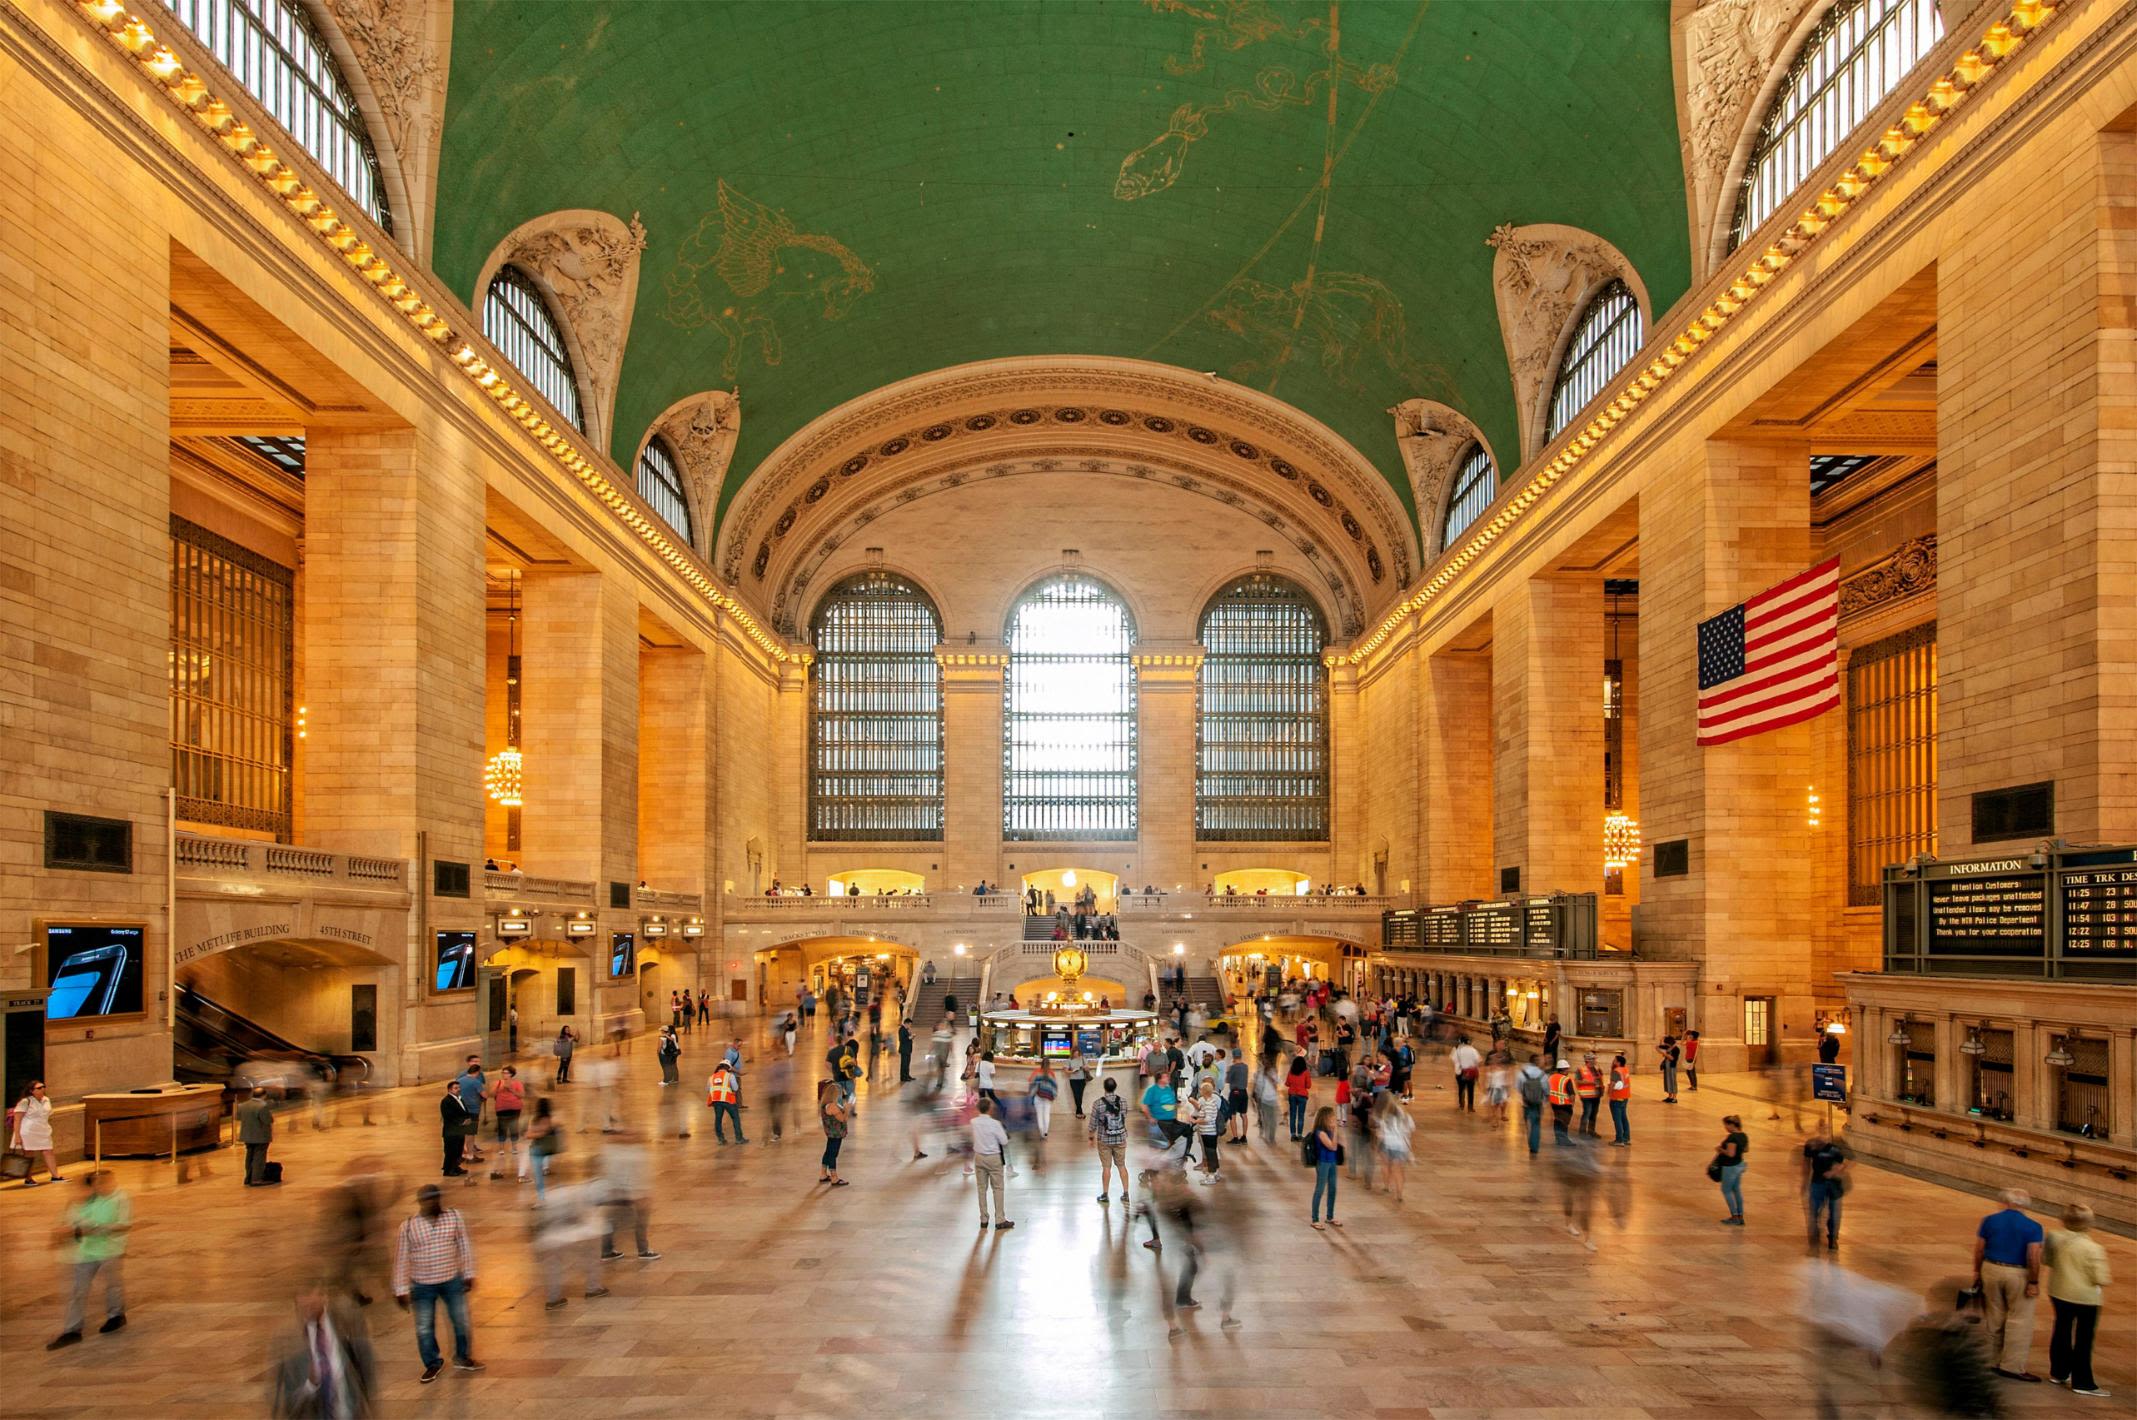 20 famous buildings in New York City